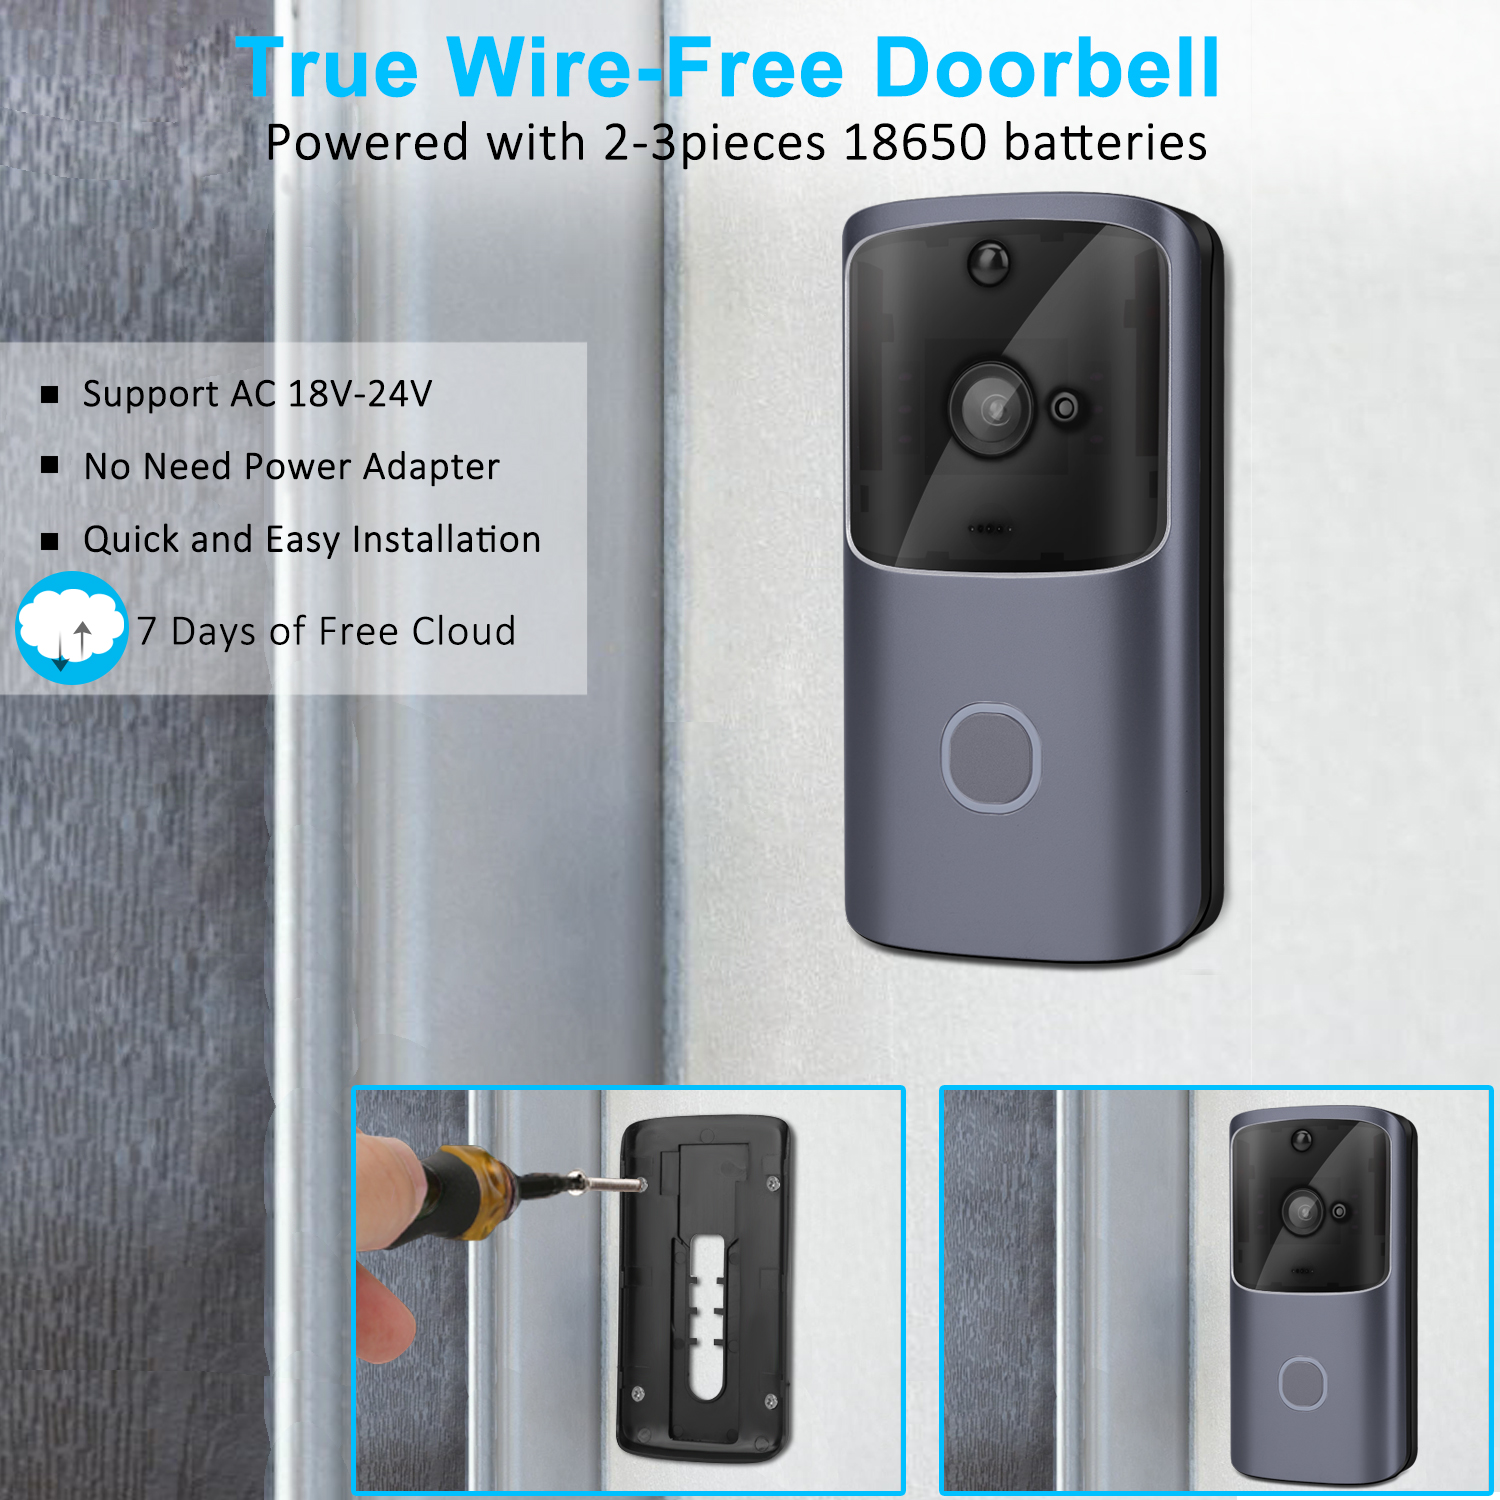 M10 WiFi Wireless Video Doorbell Camera Security Door Bell Visual Recording for Home Monitor Remotely Unlocks Intercoms Phone